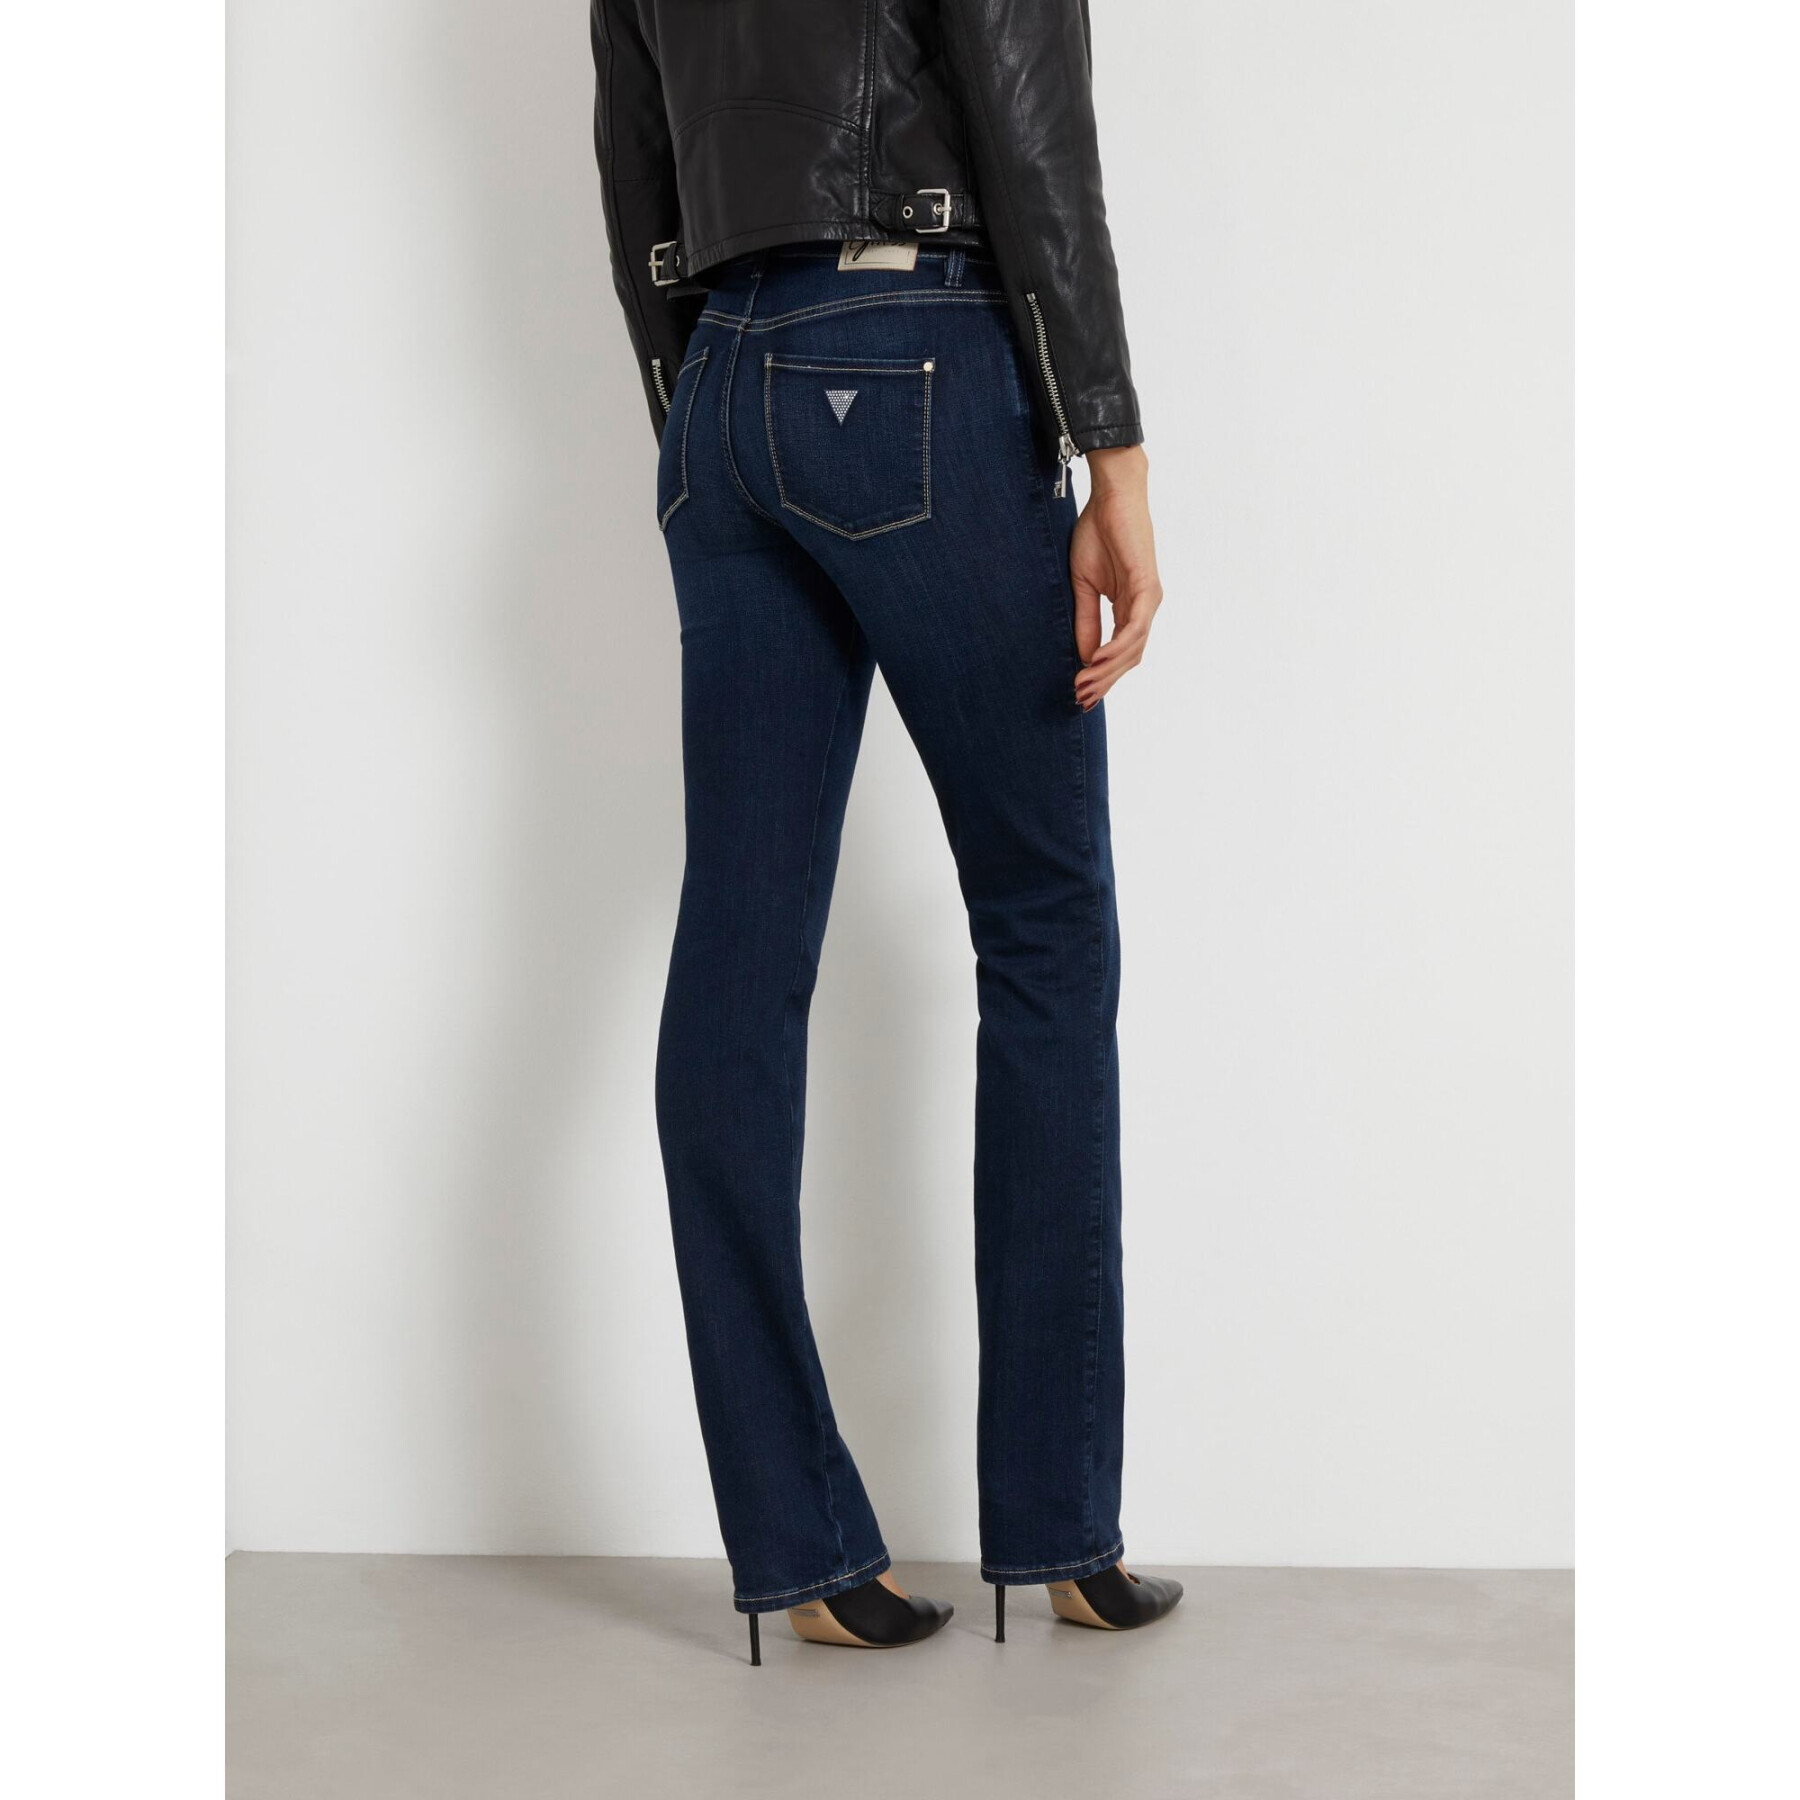 Women's jeans Guess Sexy Straight